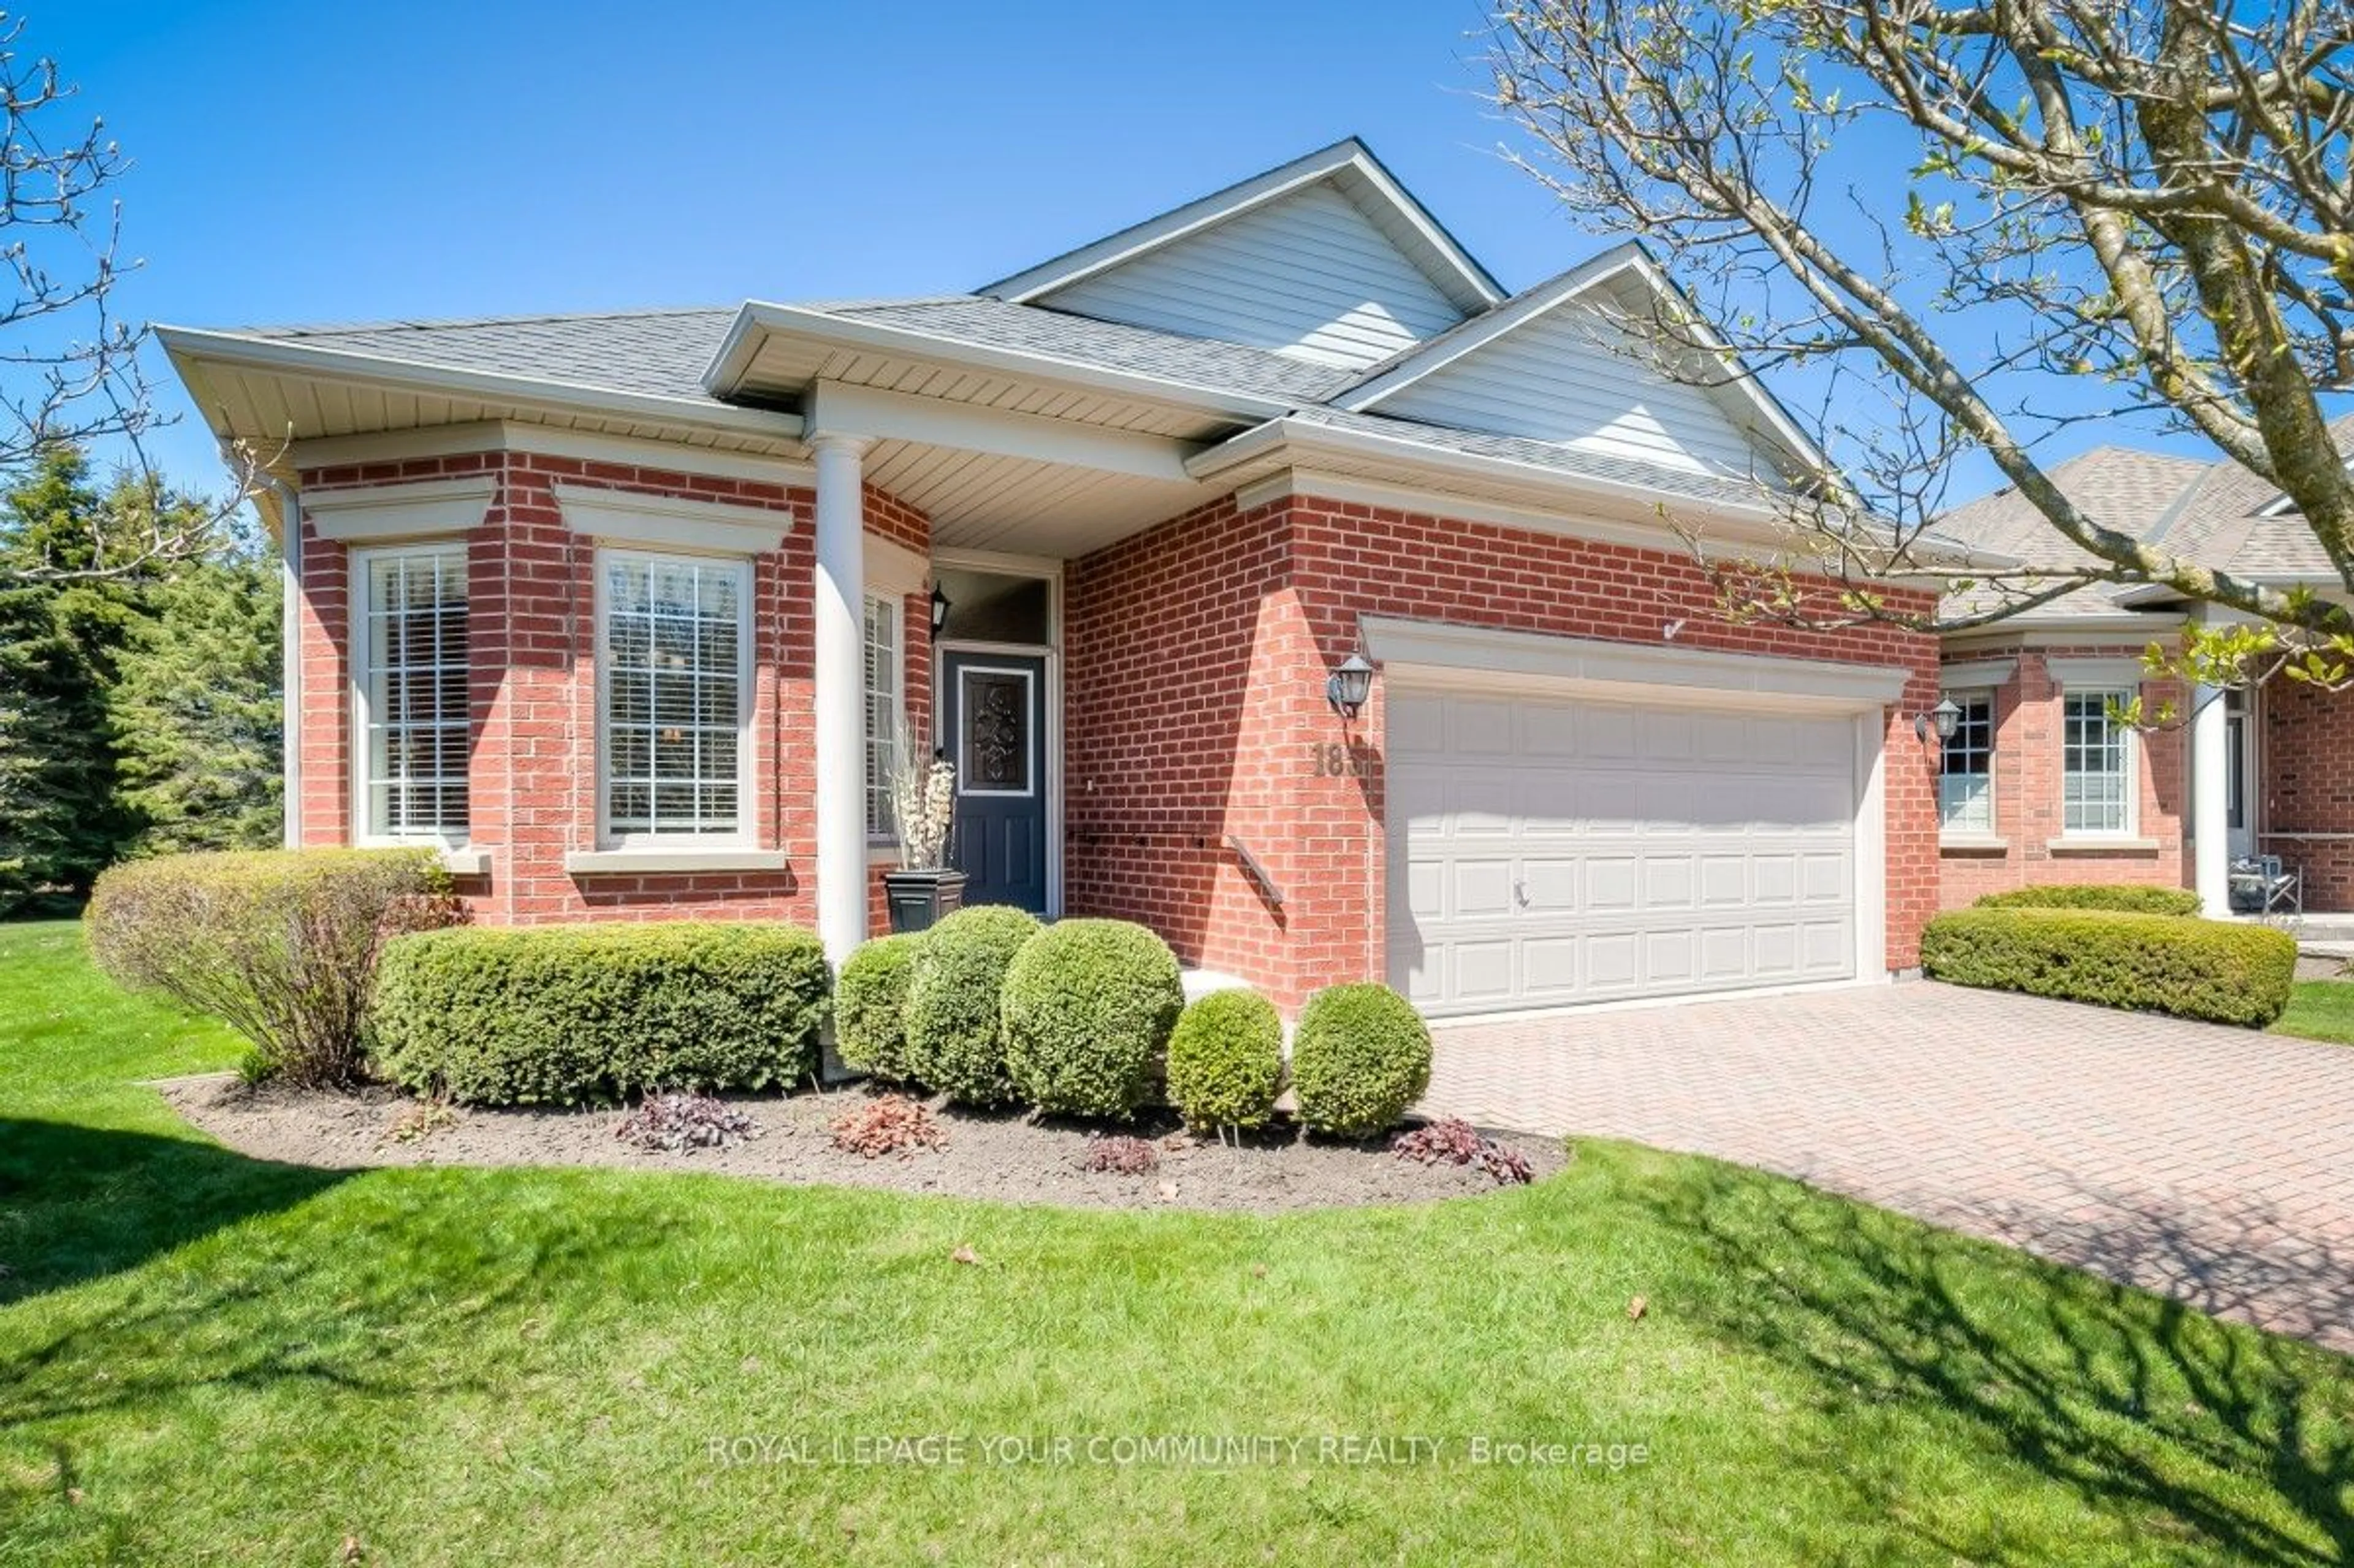 Home with brick exterior material for 185 Legendary Tr, Whitchurch-Stouffville Ontario L4A 1N5